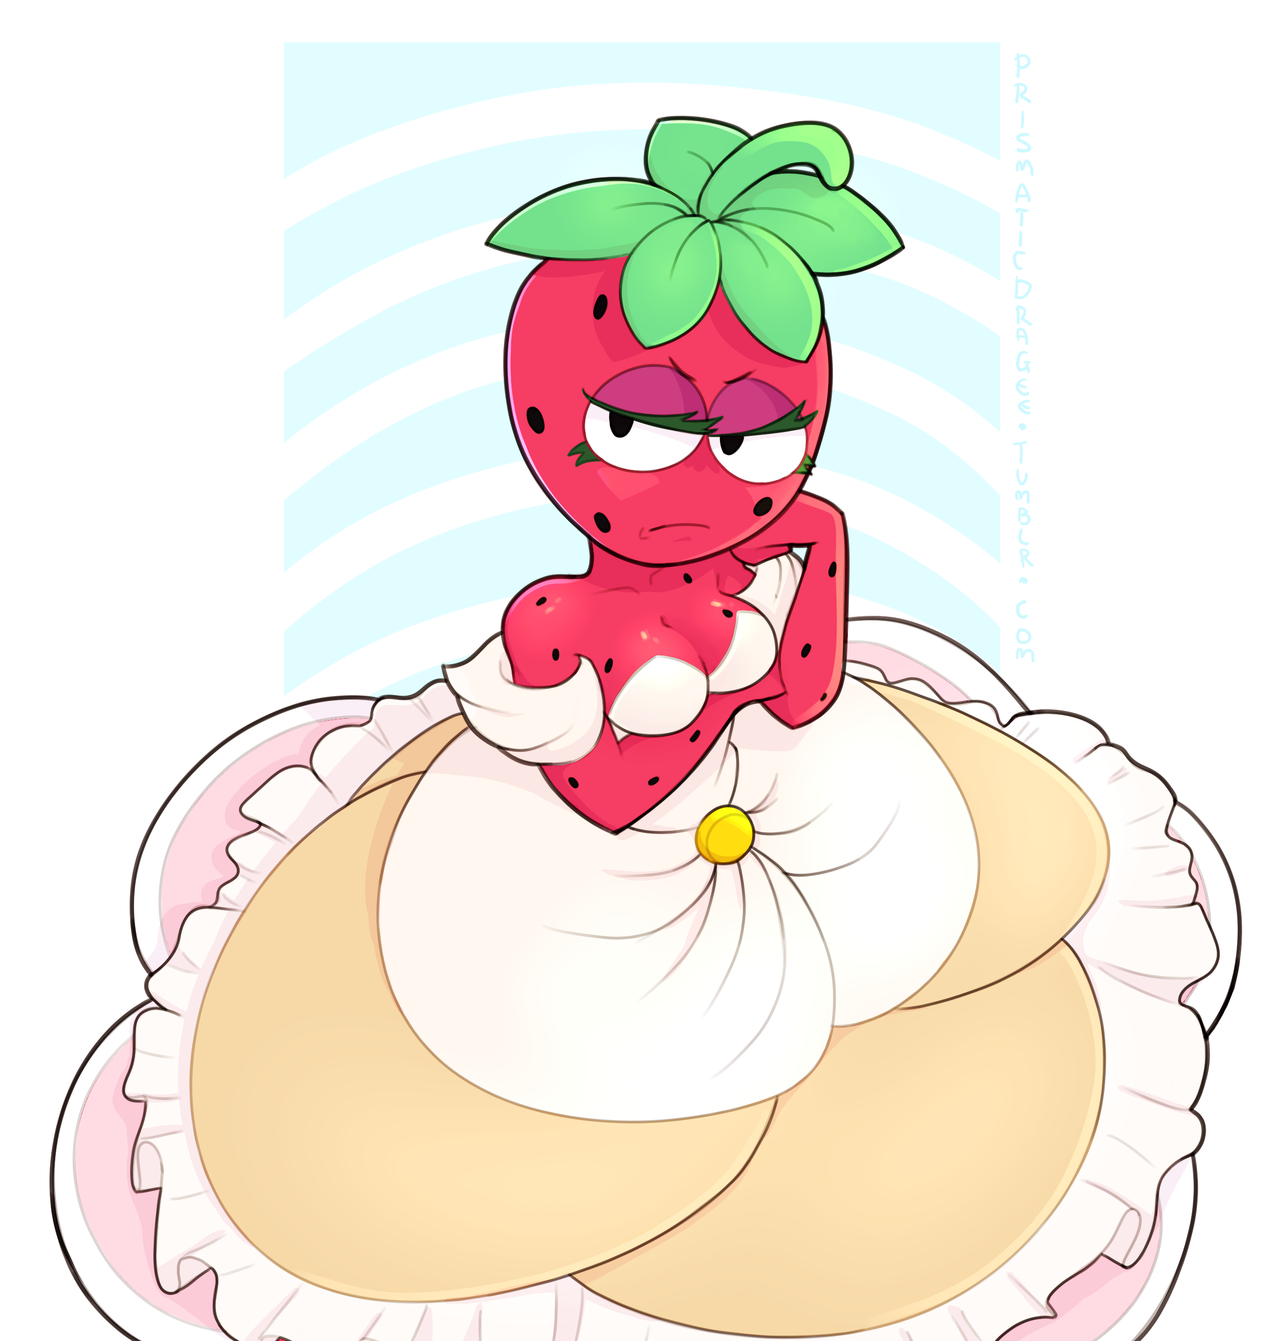 eyzmaster: prismaticdragee: With a strawberry on top? 🍓 Perfect girl! Perfect